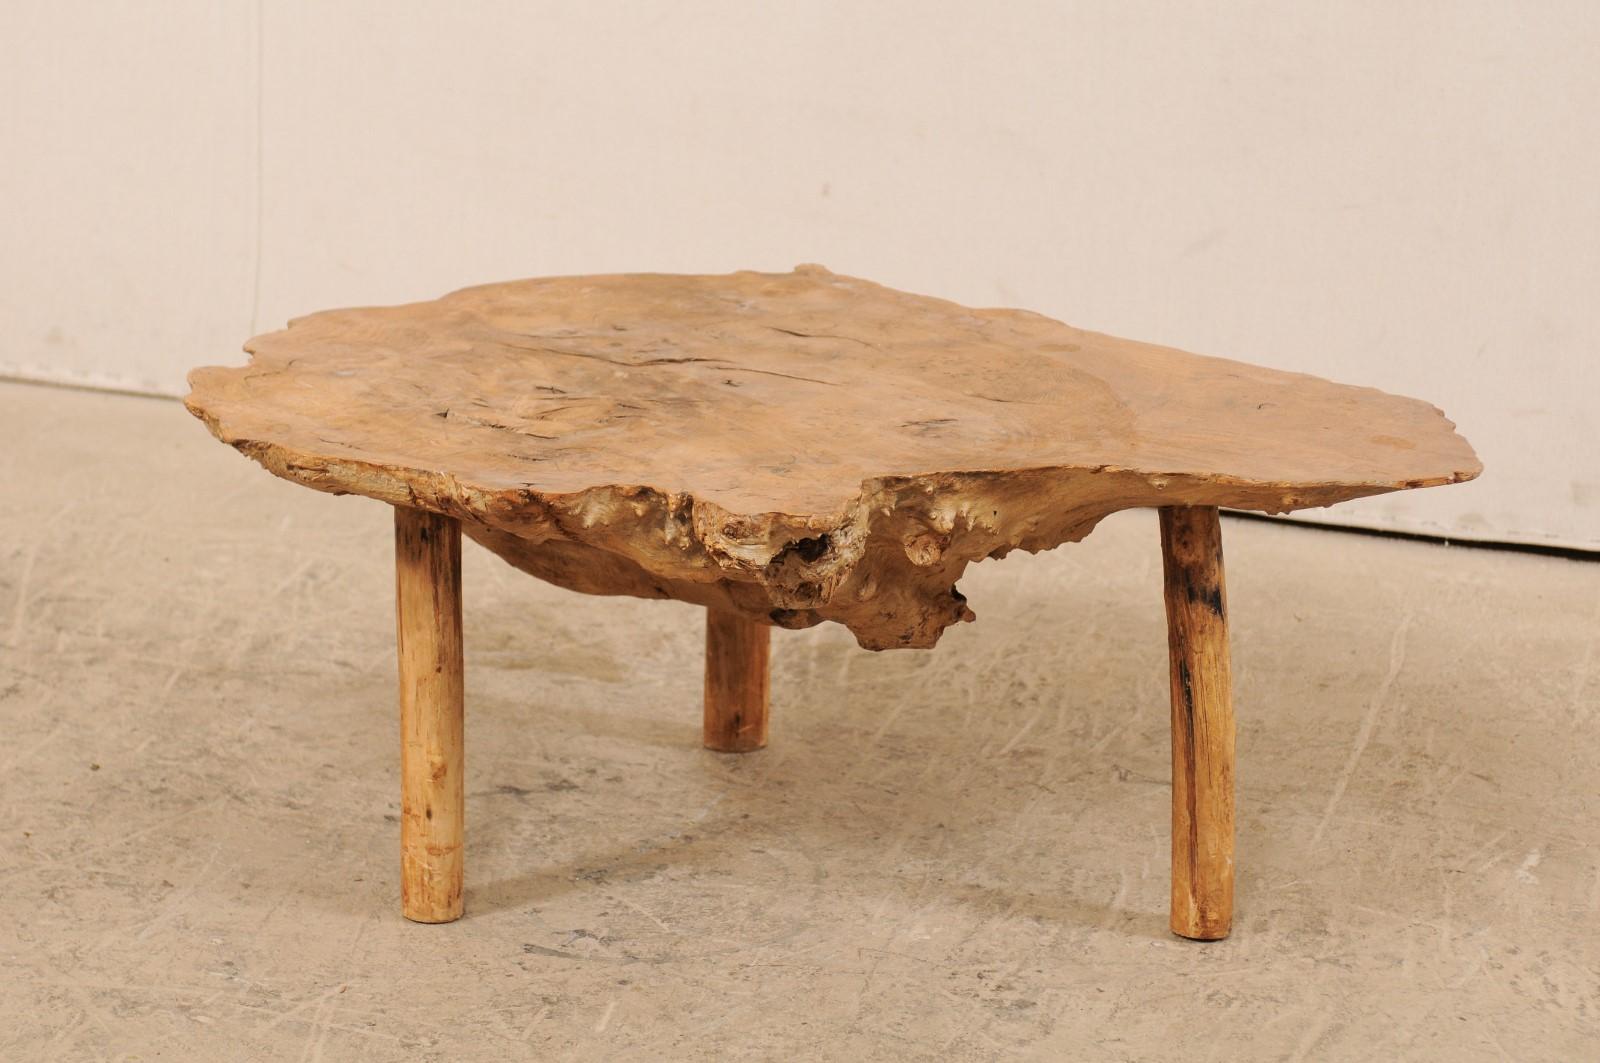 A Spanish coffee table of burl wood from the turn of the 19th-20th century. This antique table from Spain features a large single section of burl wood, with smooth top showing the beautifully formed rings, and natural live-edge along sides. The